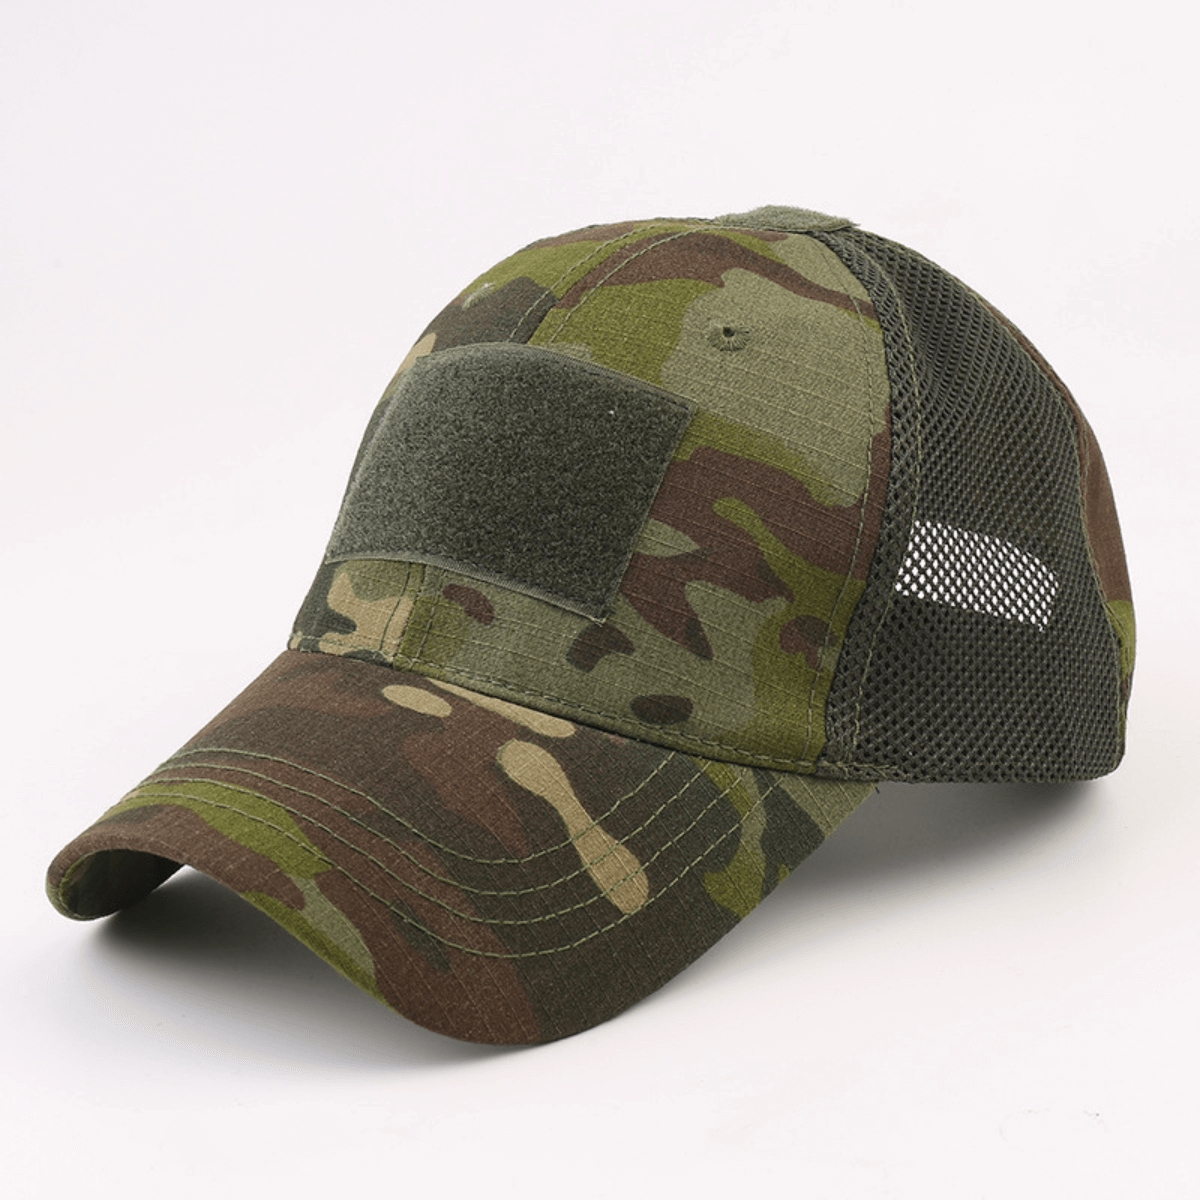 Picture of JupiterGear JG-HAT2-BDUCAMO Military-Style Tactical Patch Hat with Adjustable Strap (JG-HAT2) BDU Camo